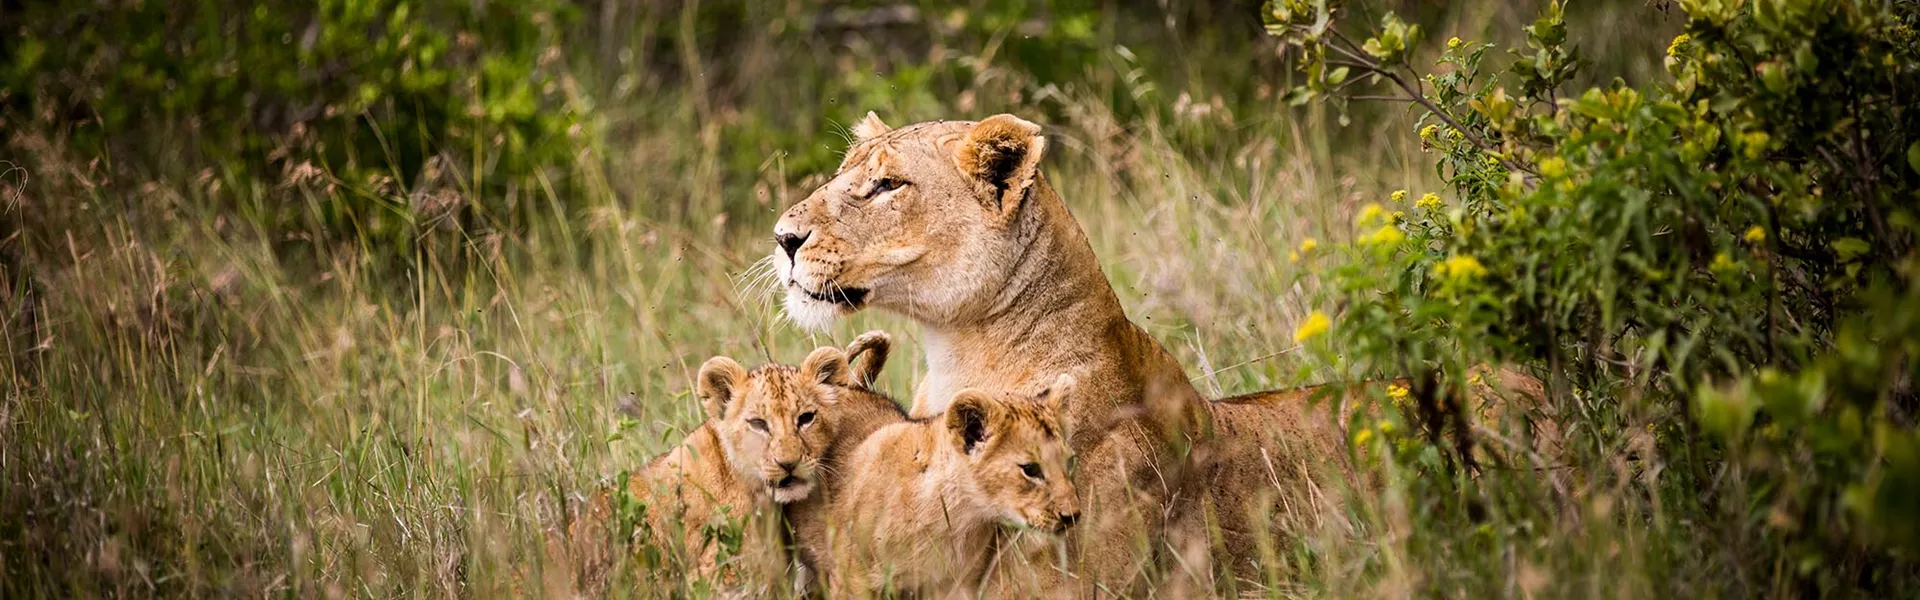 Lioness with Cubs in long grass